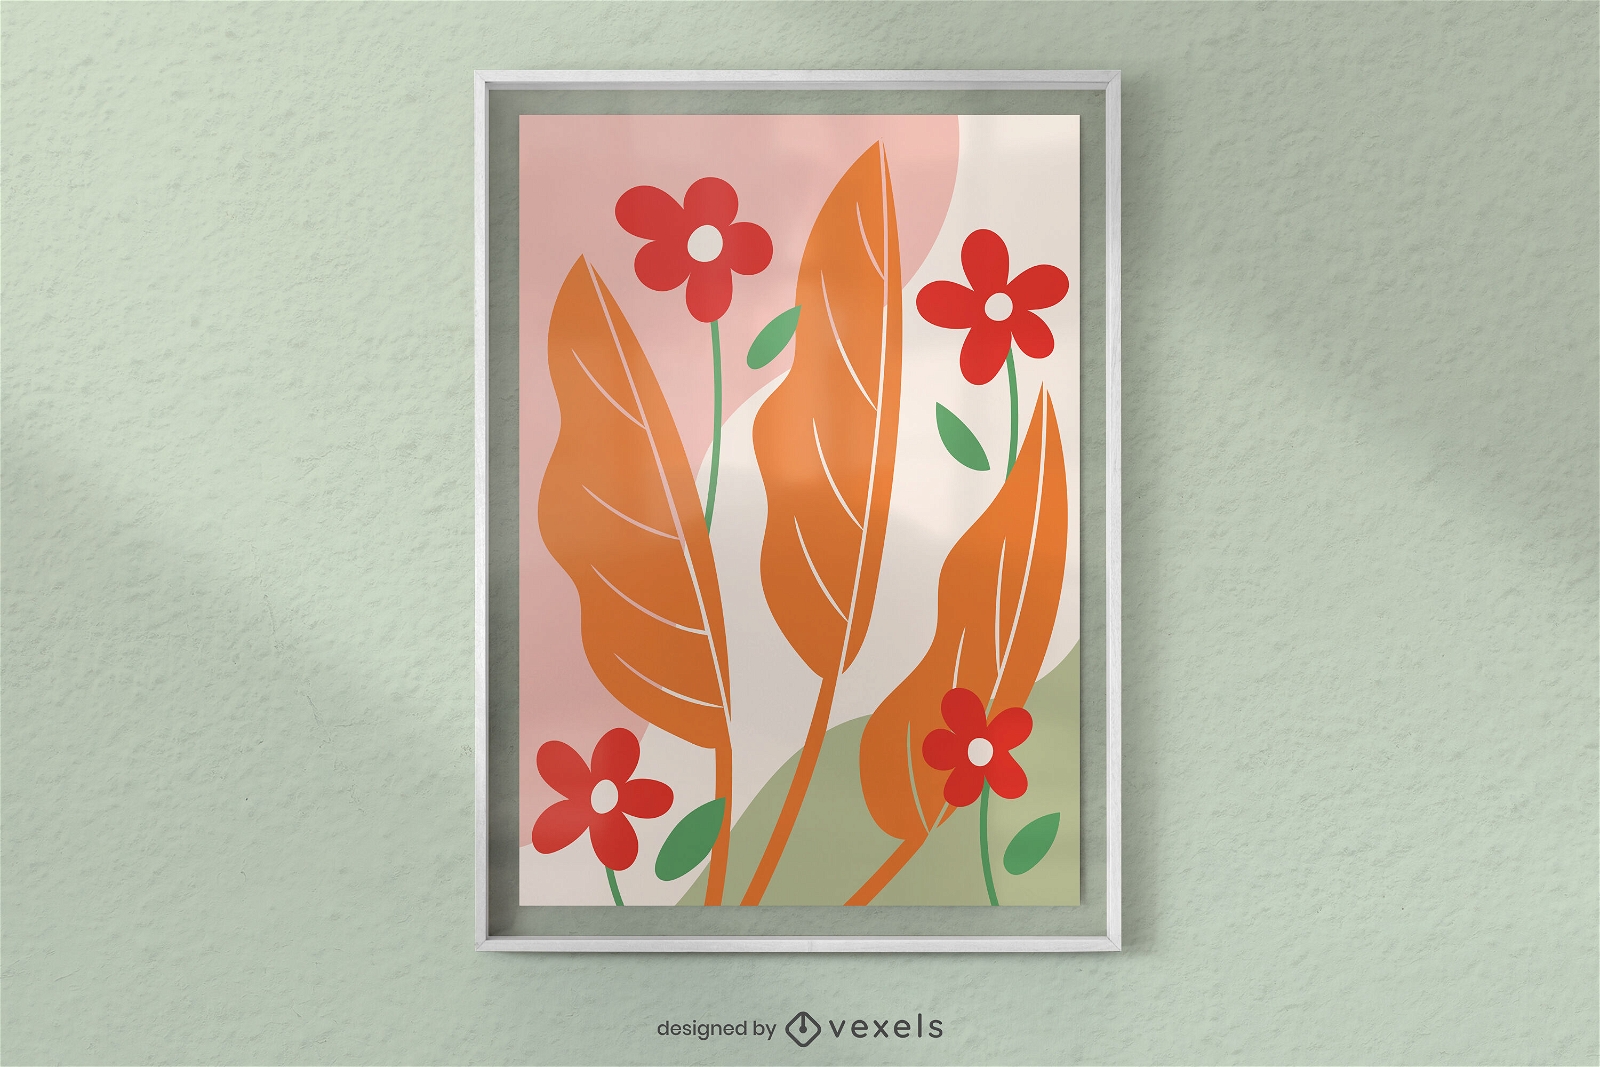 Autumnal leaves and flowers poster design